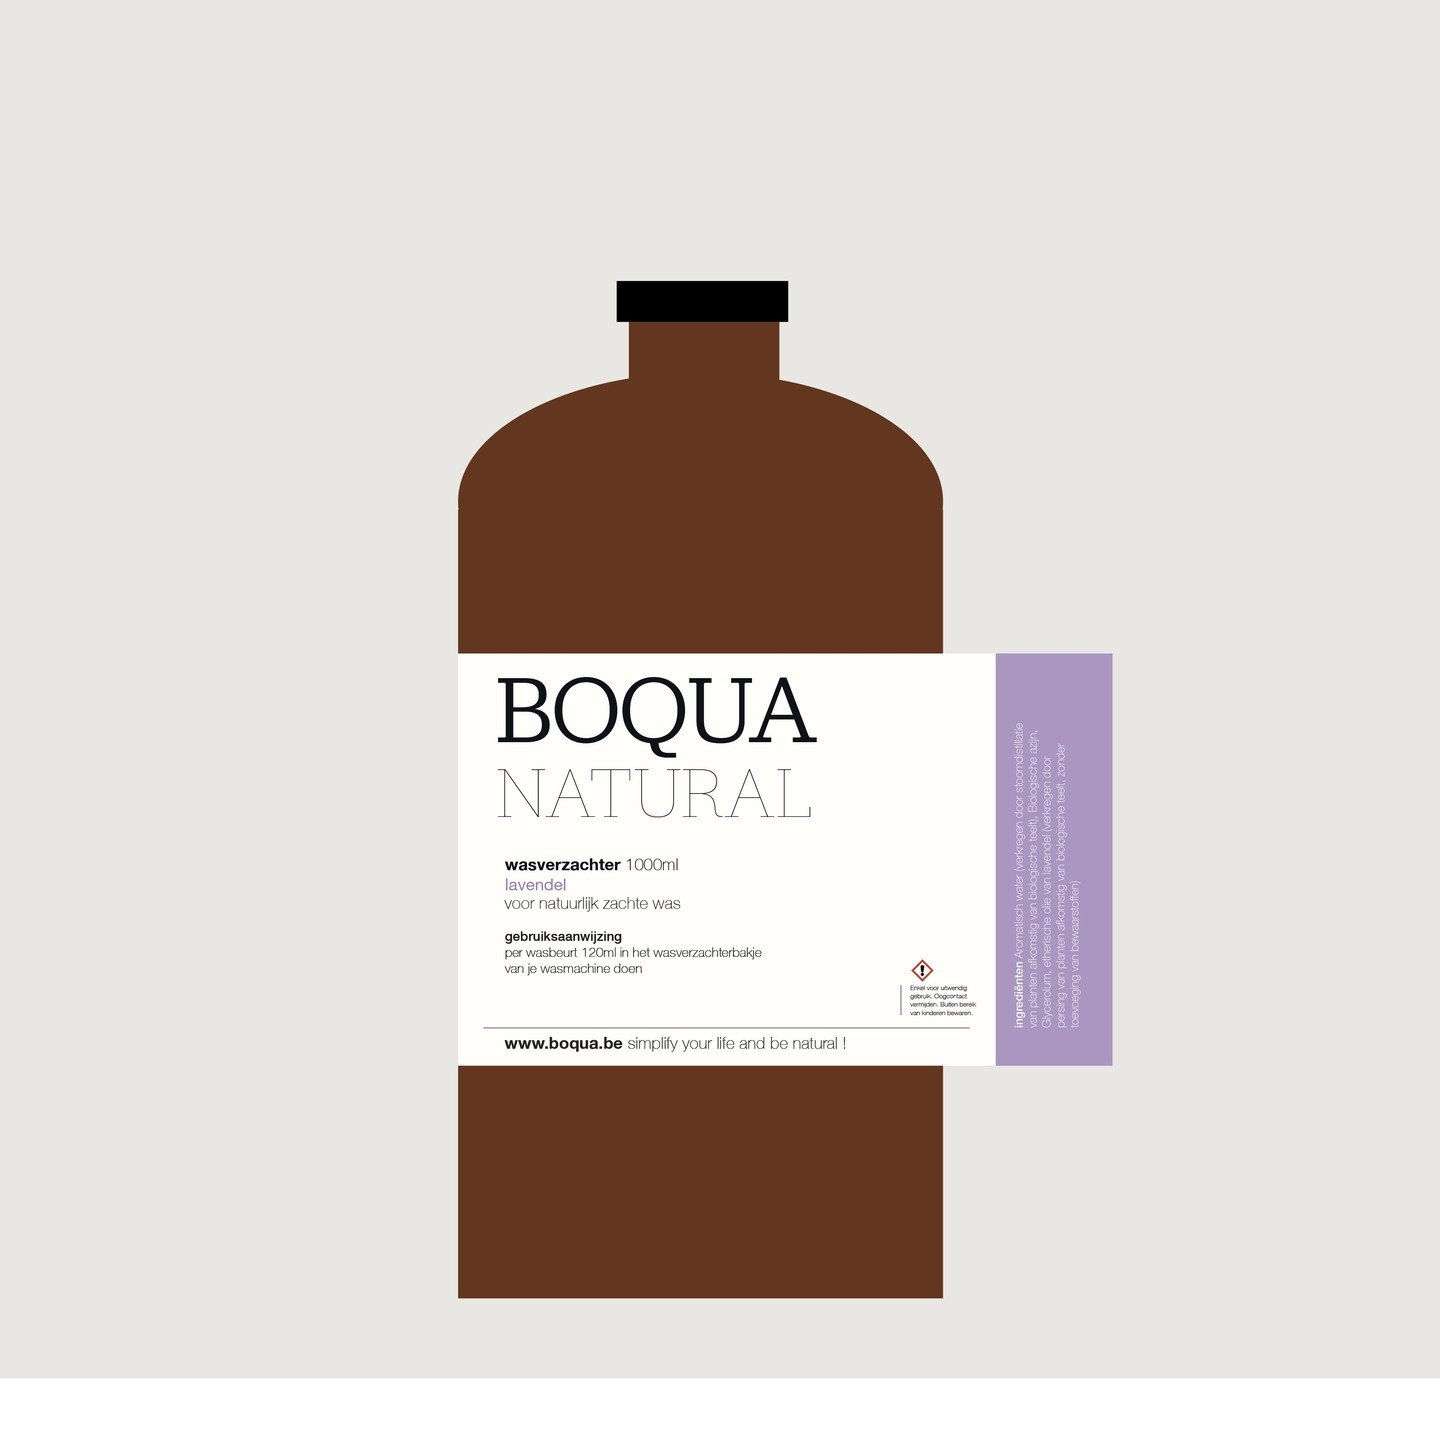 Whoop Whoop! Almost weekend, time for your laundry 😊! Since 2018 I am in charge of the graphics and illustrations for Boqua Natural, a range of natural cleaning products, developed &amp; handmade by Bibi Diabokua. Made in Belgium.
@boquanatural 
The